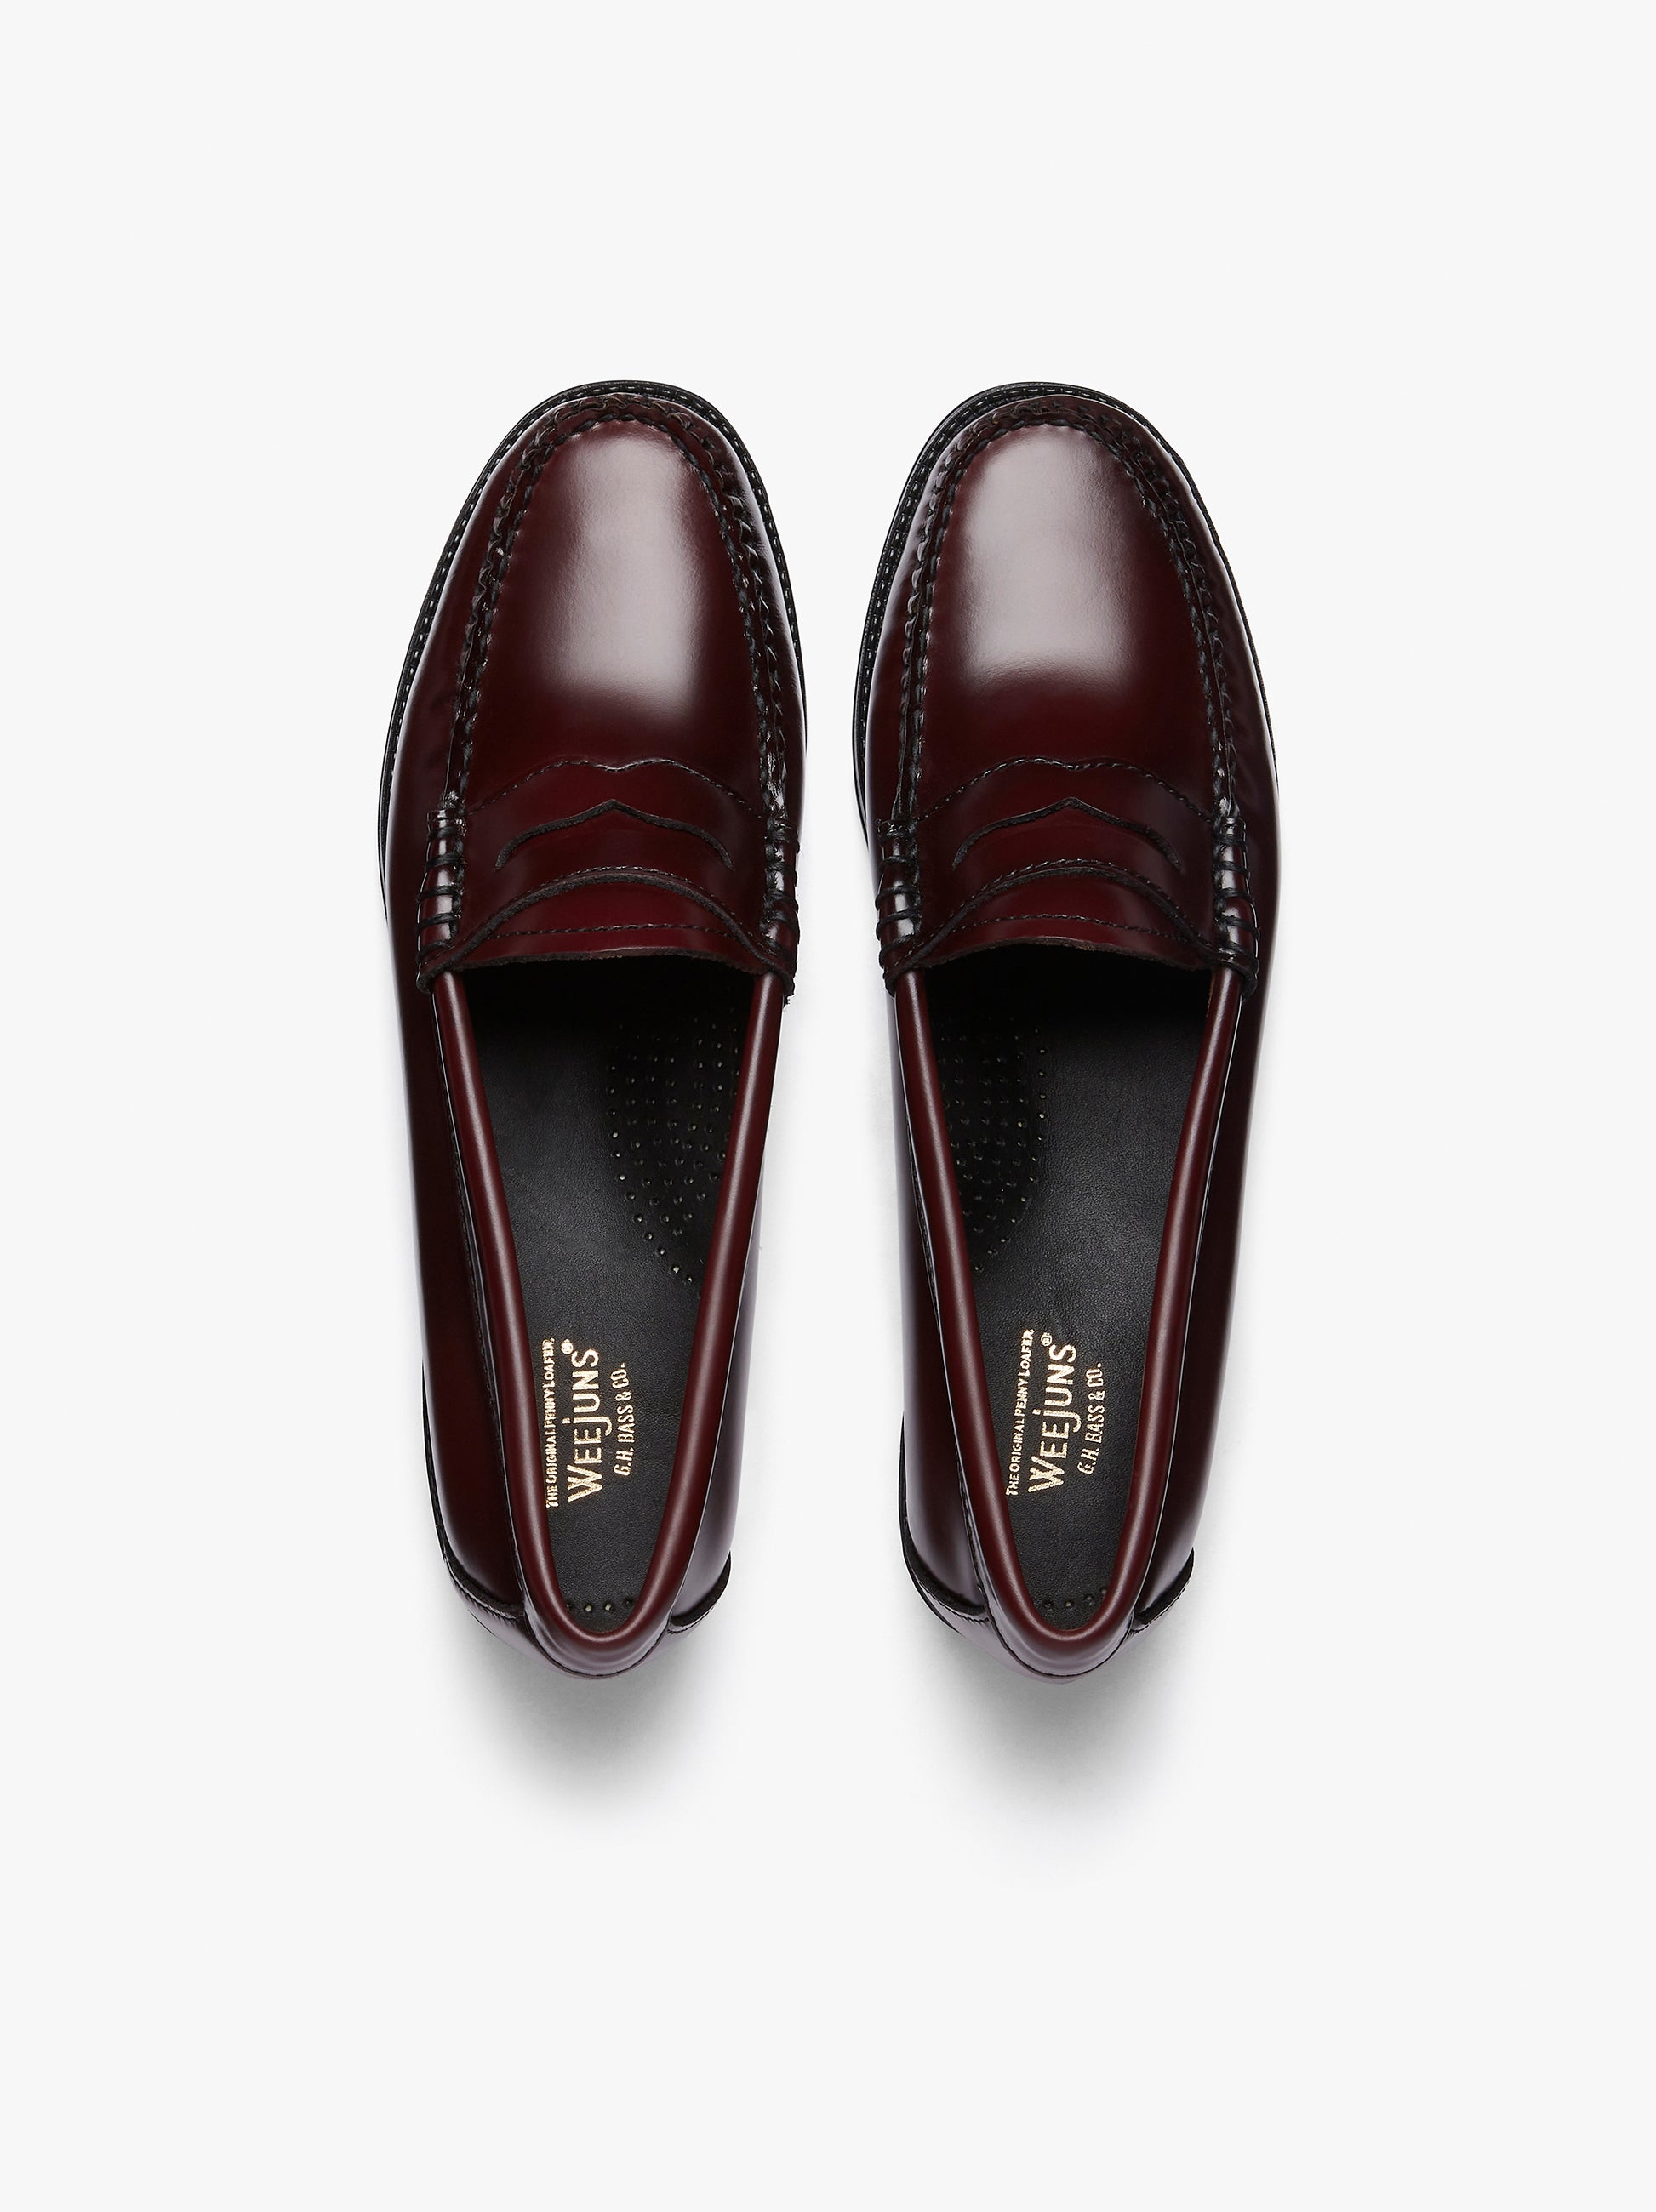 Easy Weejuns Penny Loafers Wine Leather